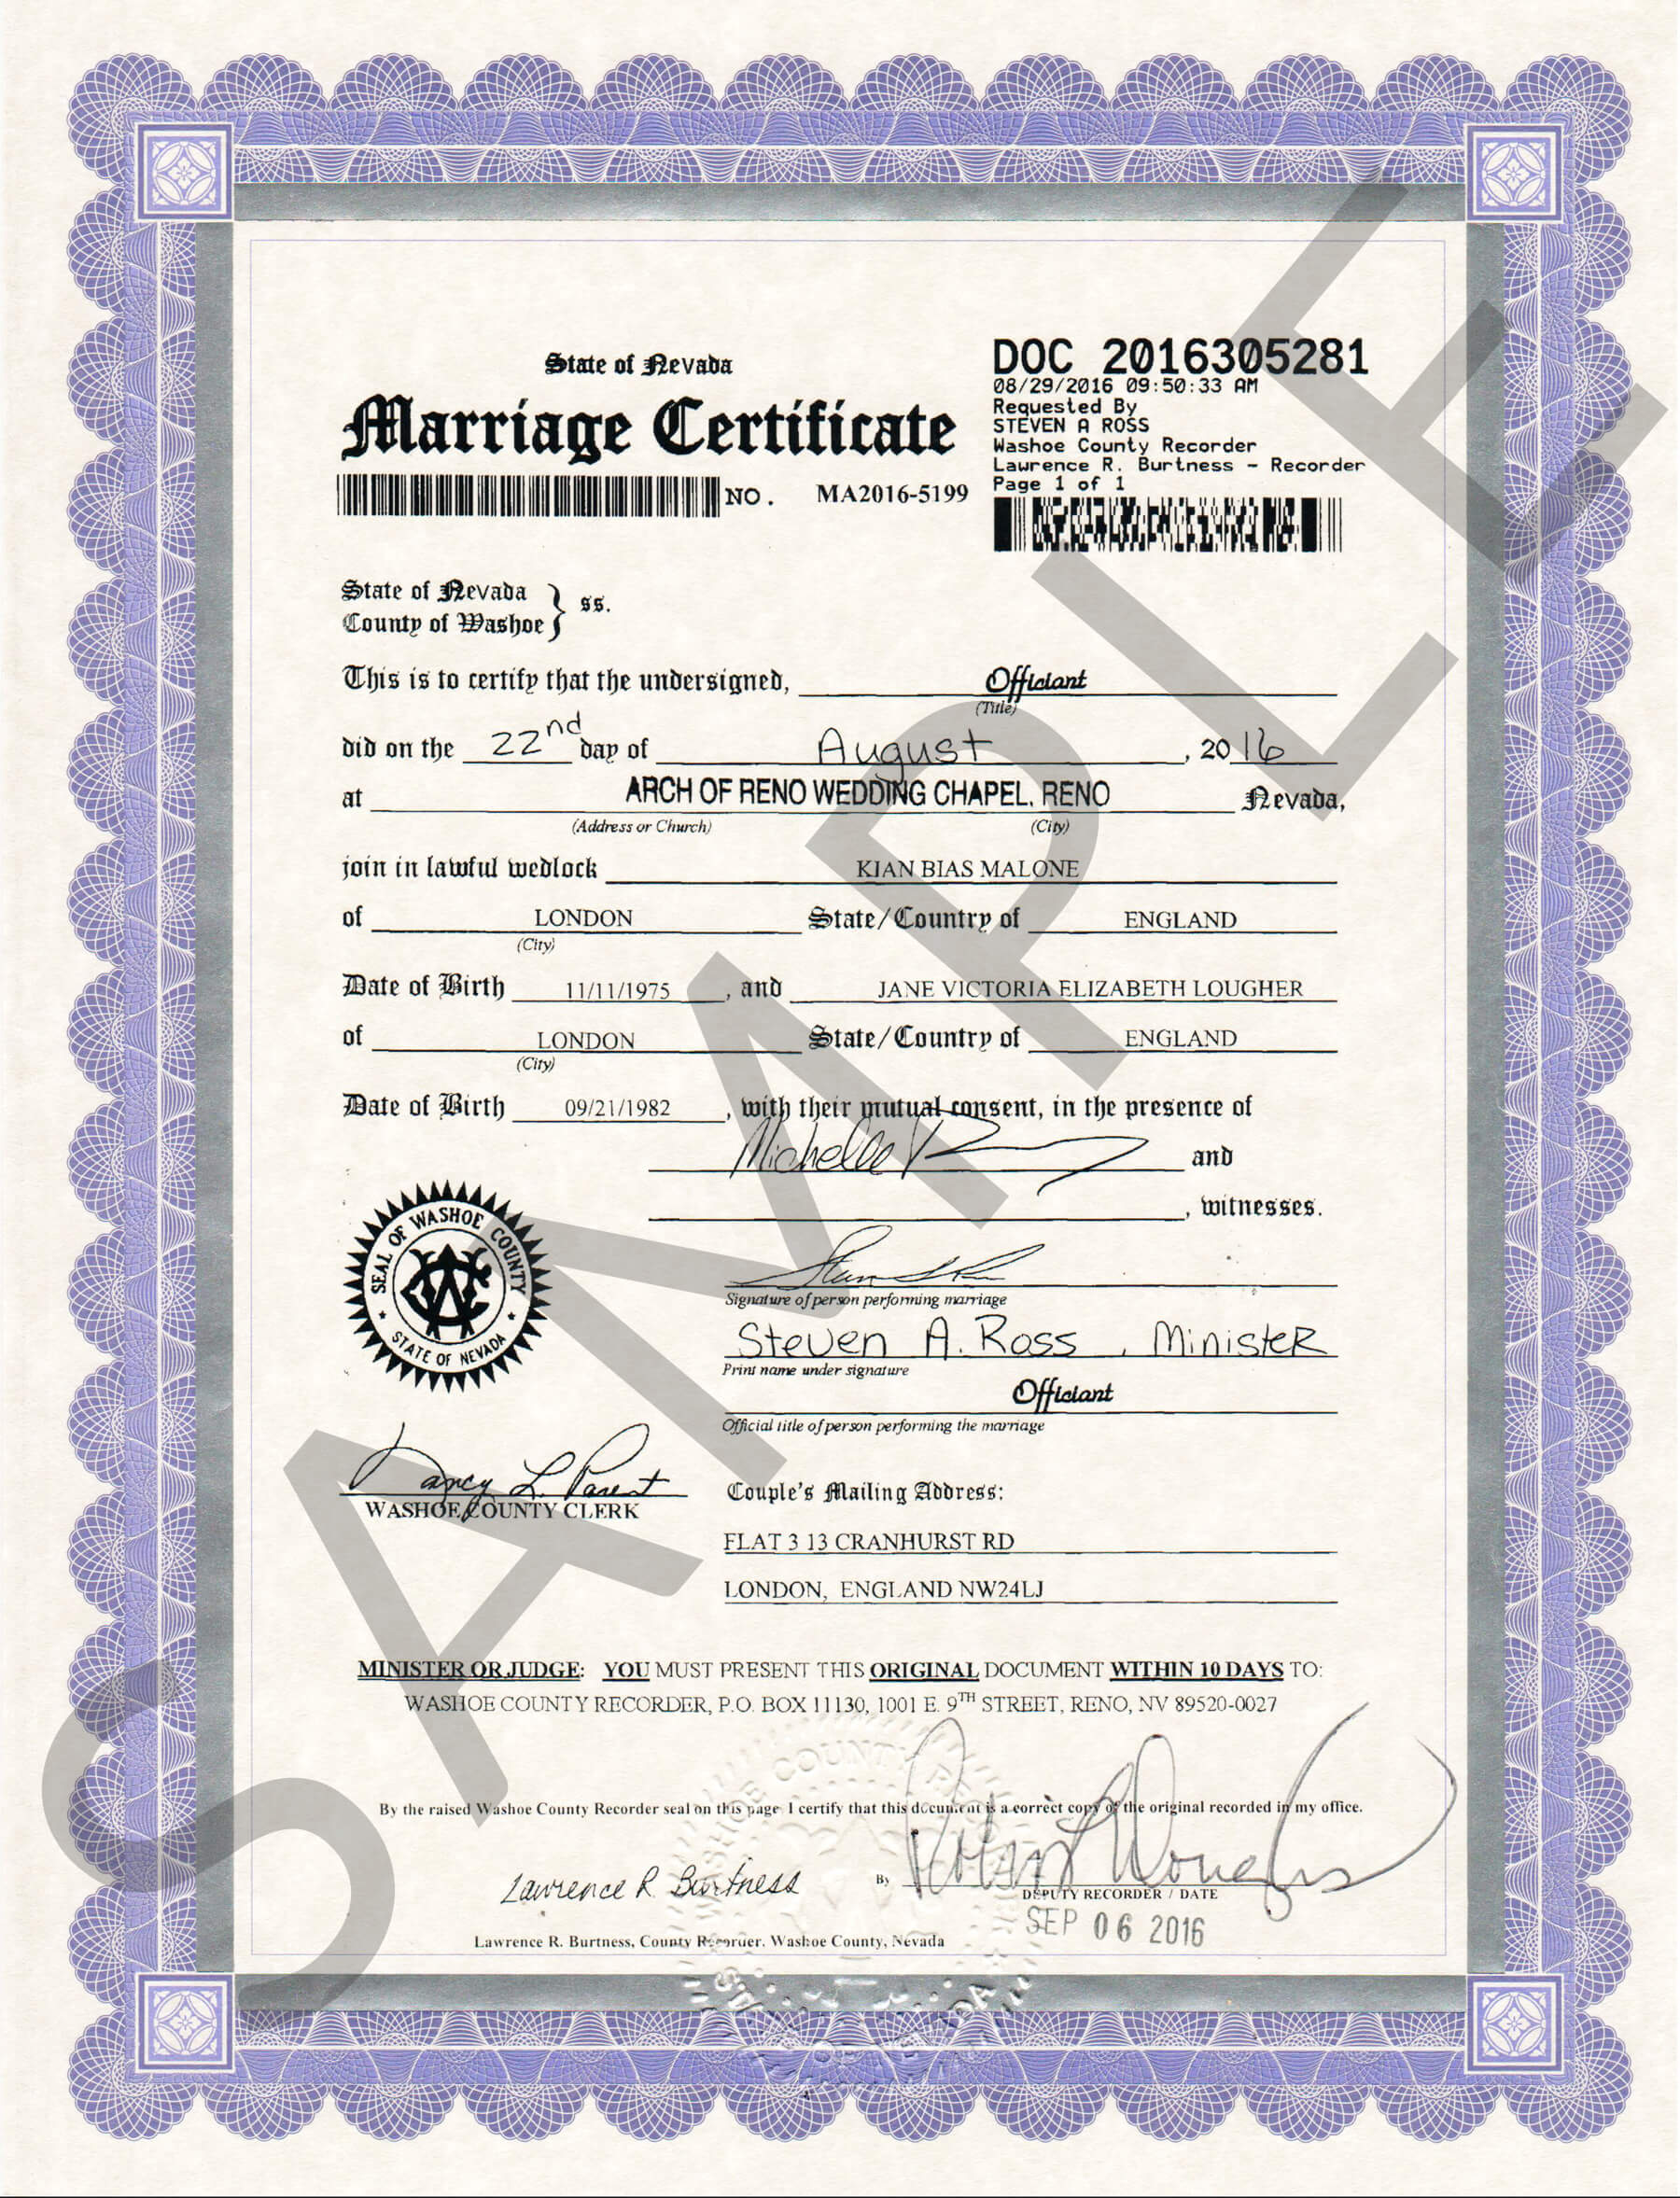 Sample Certificates | Nevada Document Retrieval Service With Regard To Certificate Of Marriage Template